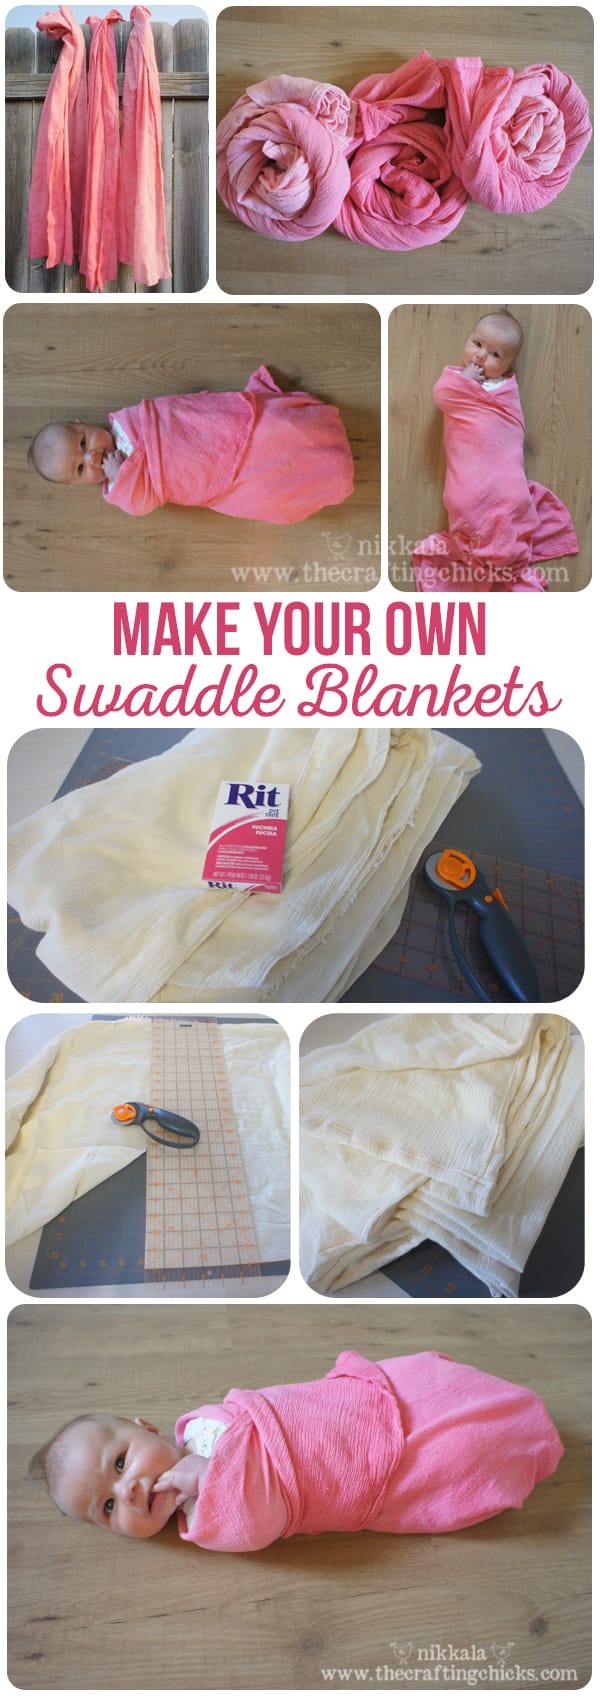 Make Your Own Swaddle Blanket